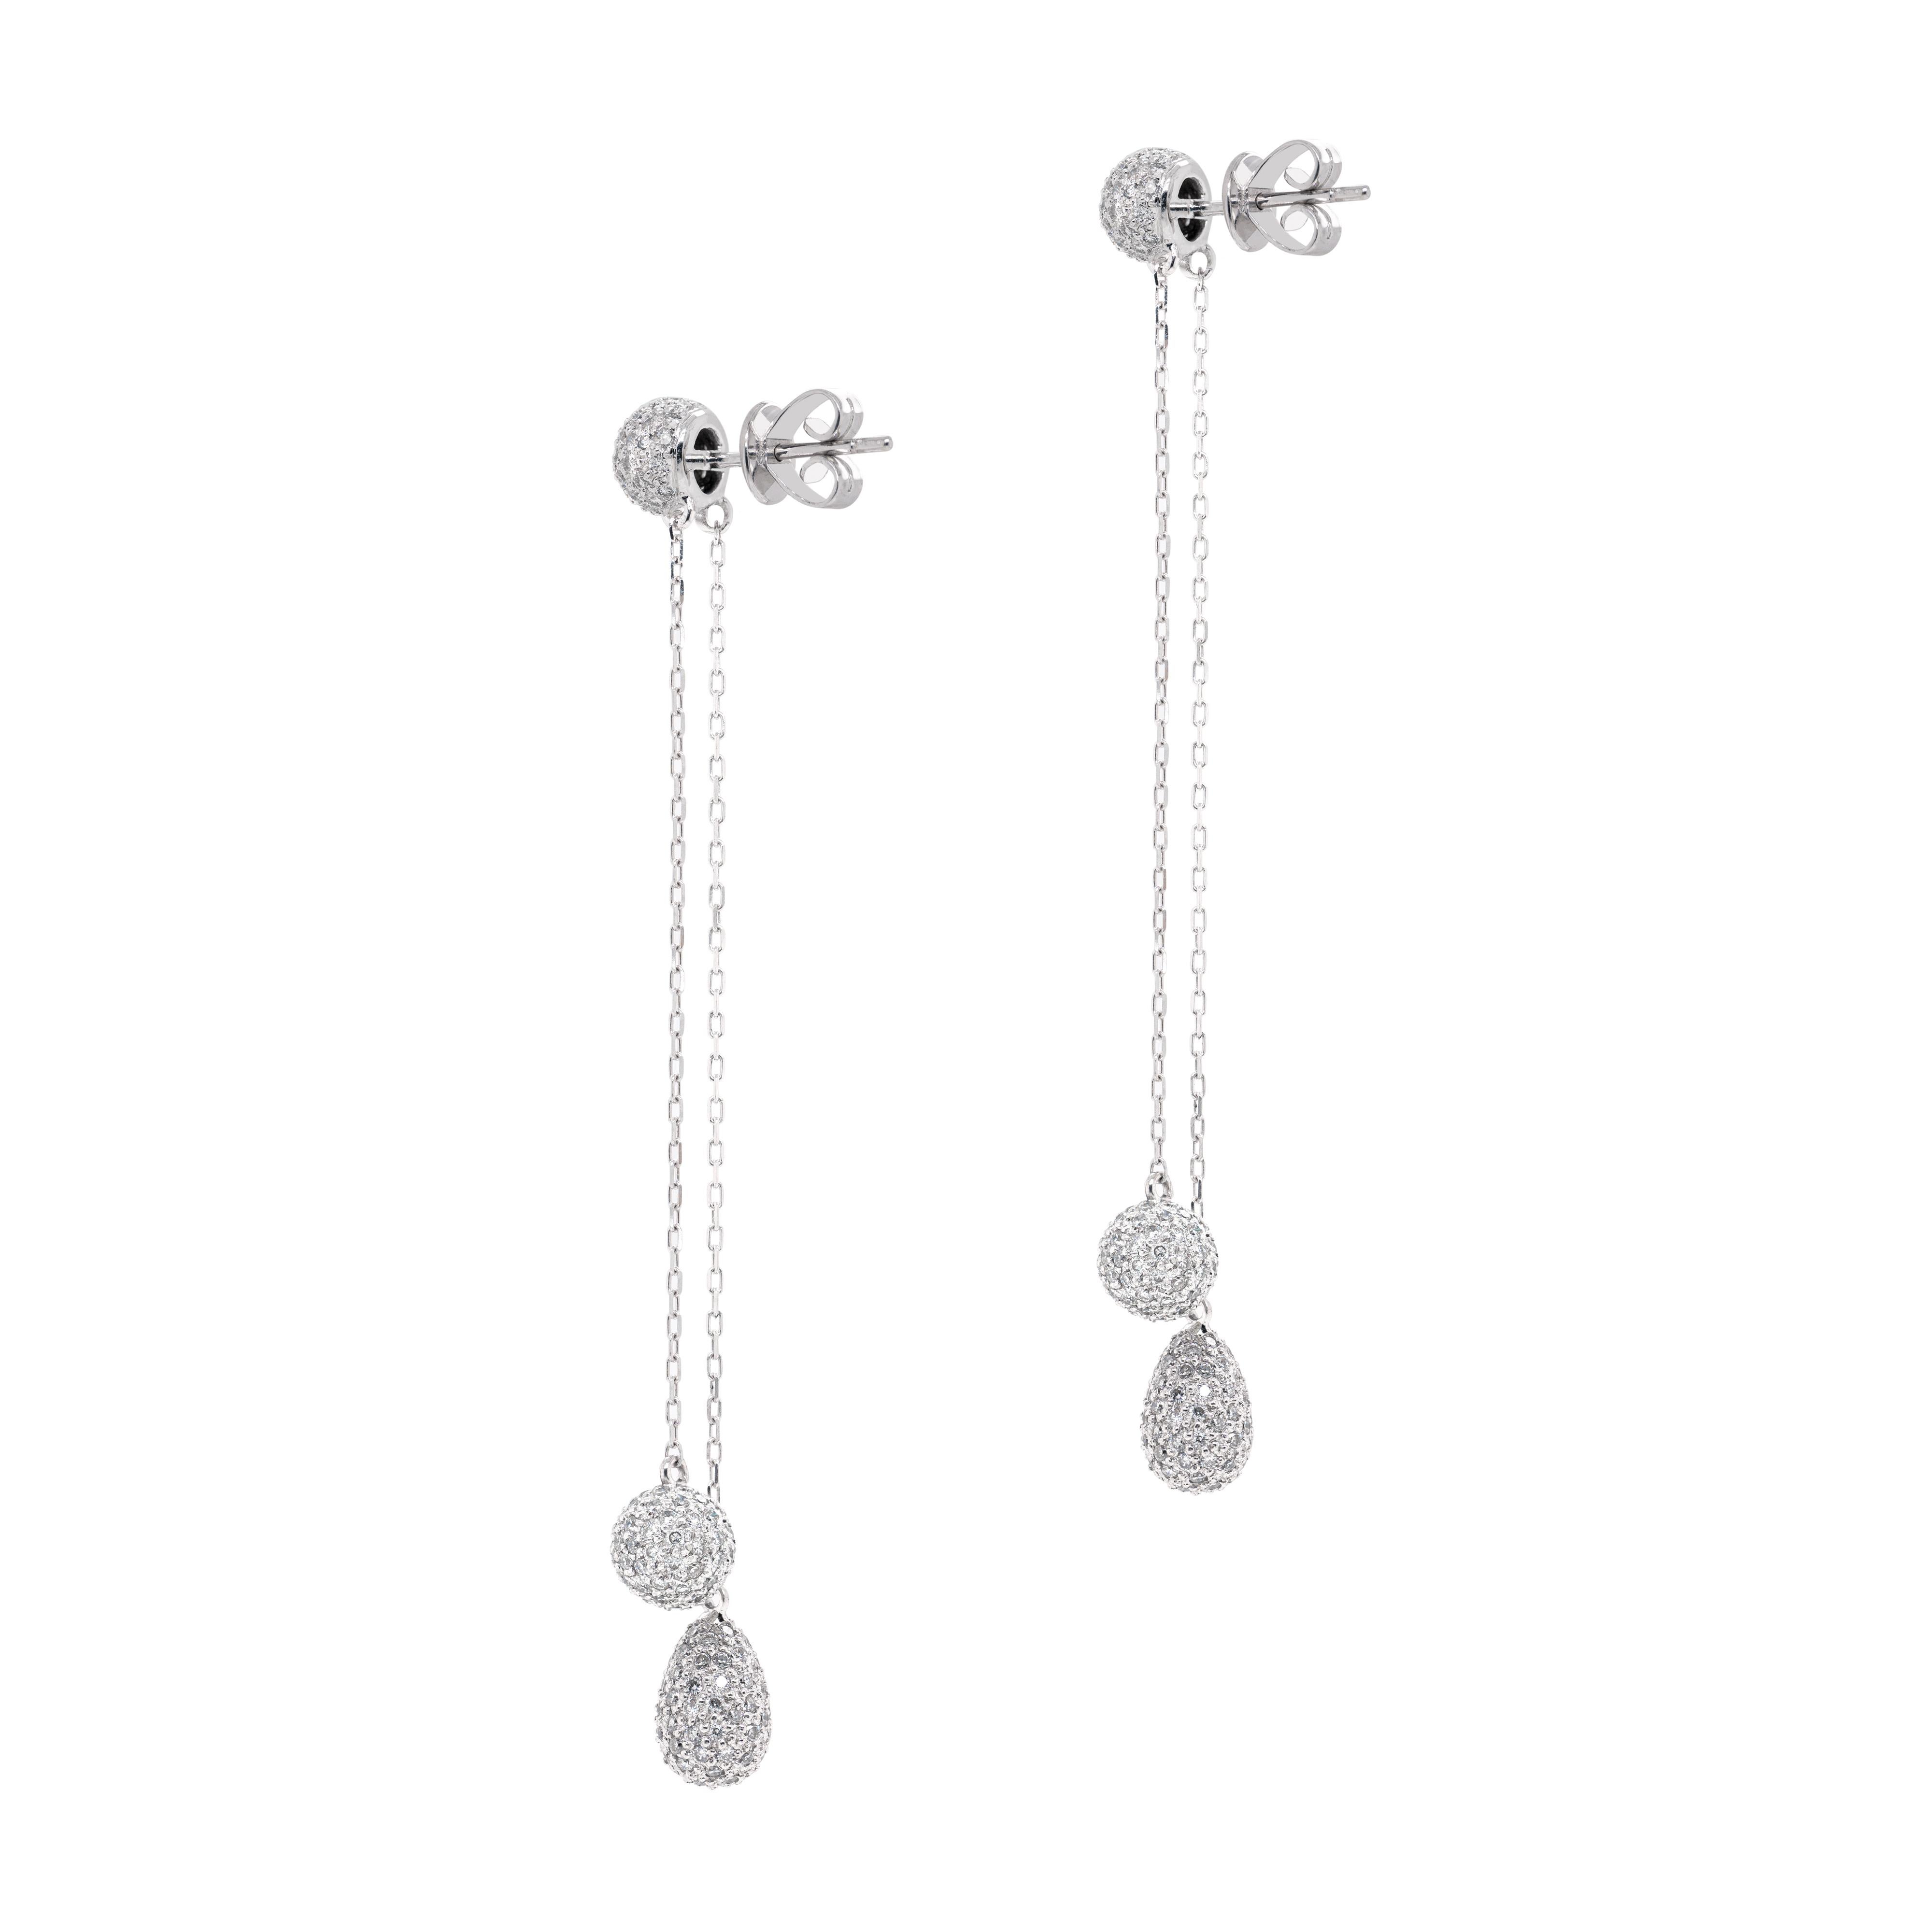 These 18 carat white gold drop earrings are beautifully designed with two asymmetric delicate chains, one ending with a ball inlaid with fine round brilliant cut diamonds and the other ending with a drop, also inlaid with fine round brilliant cut